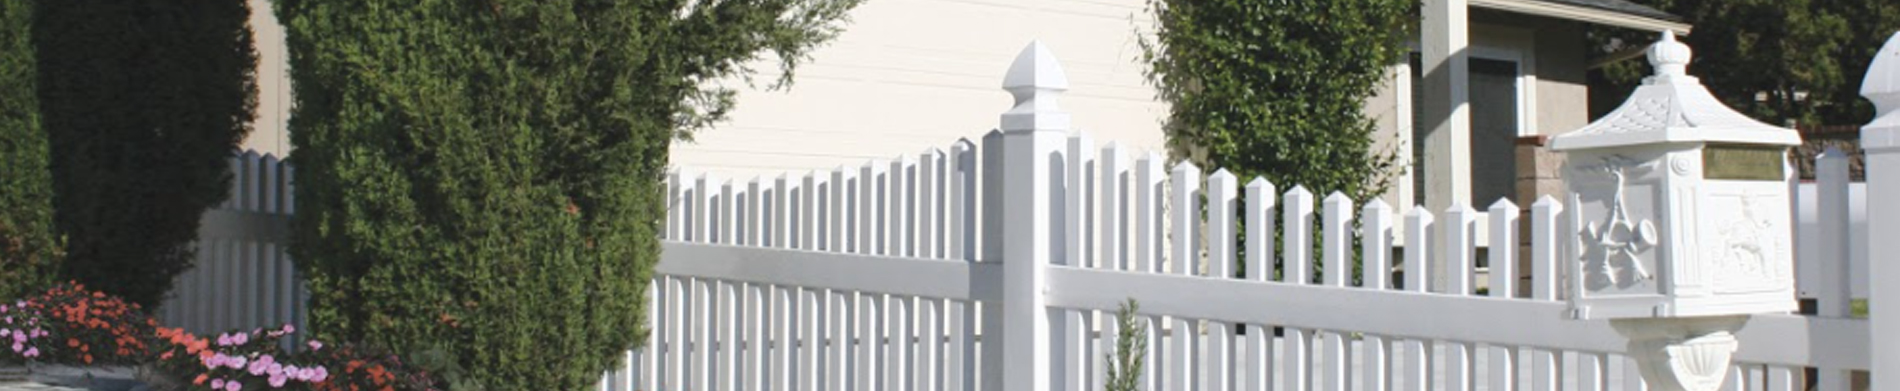 Demarcate your property line and make neighbors enviable with custom vinyl fencing